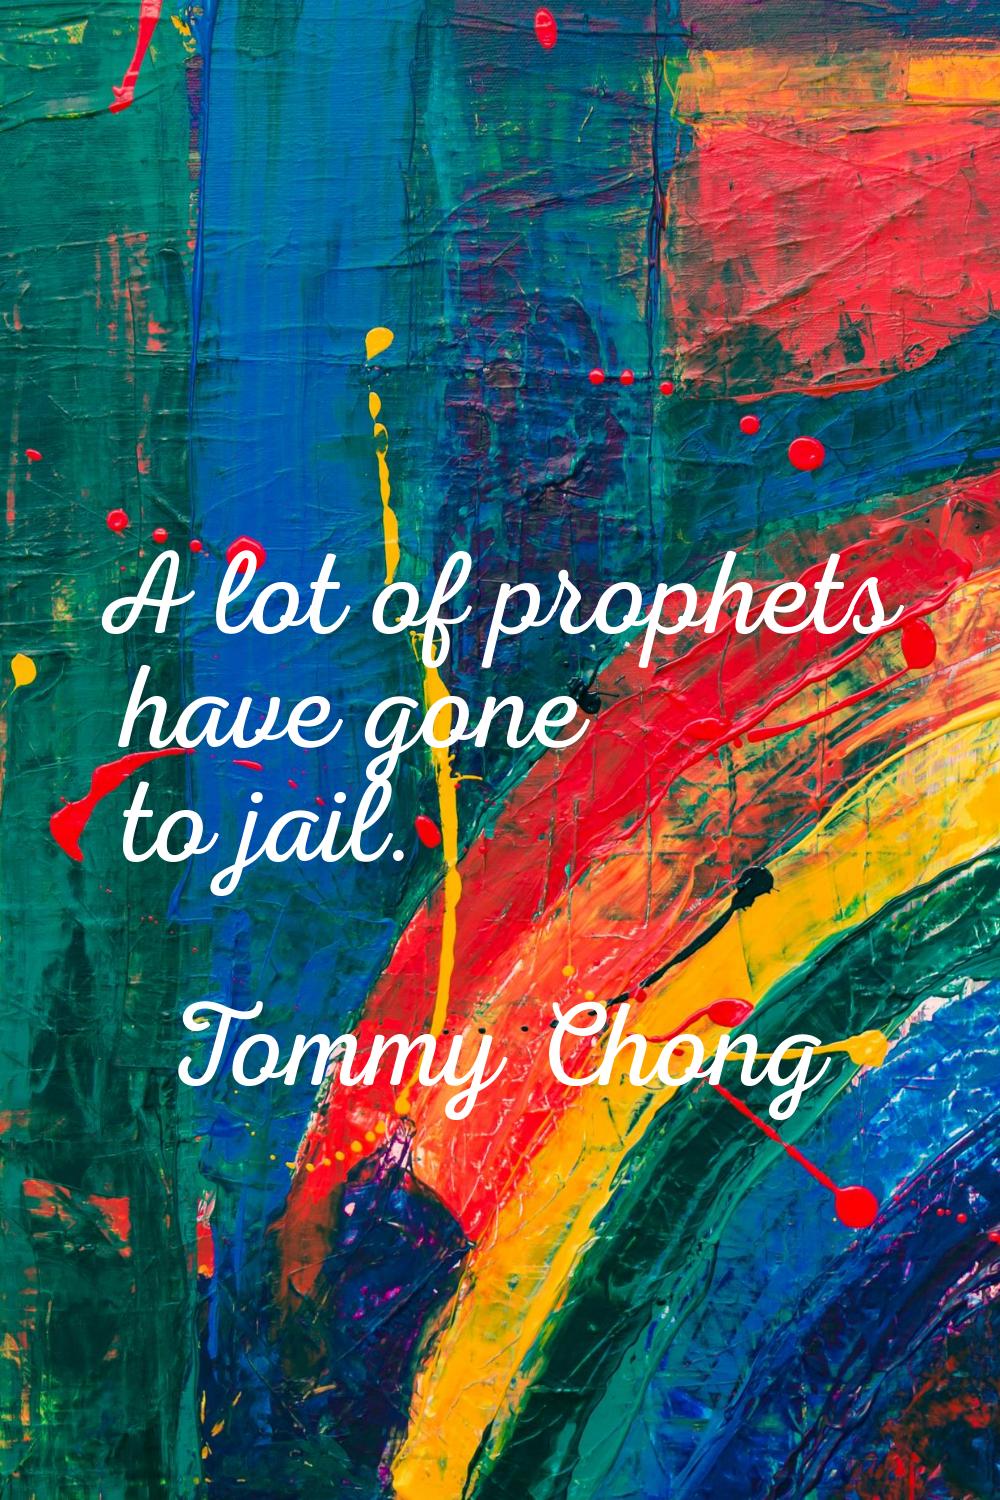 A lot of prophets have gone to jail.